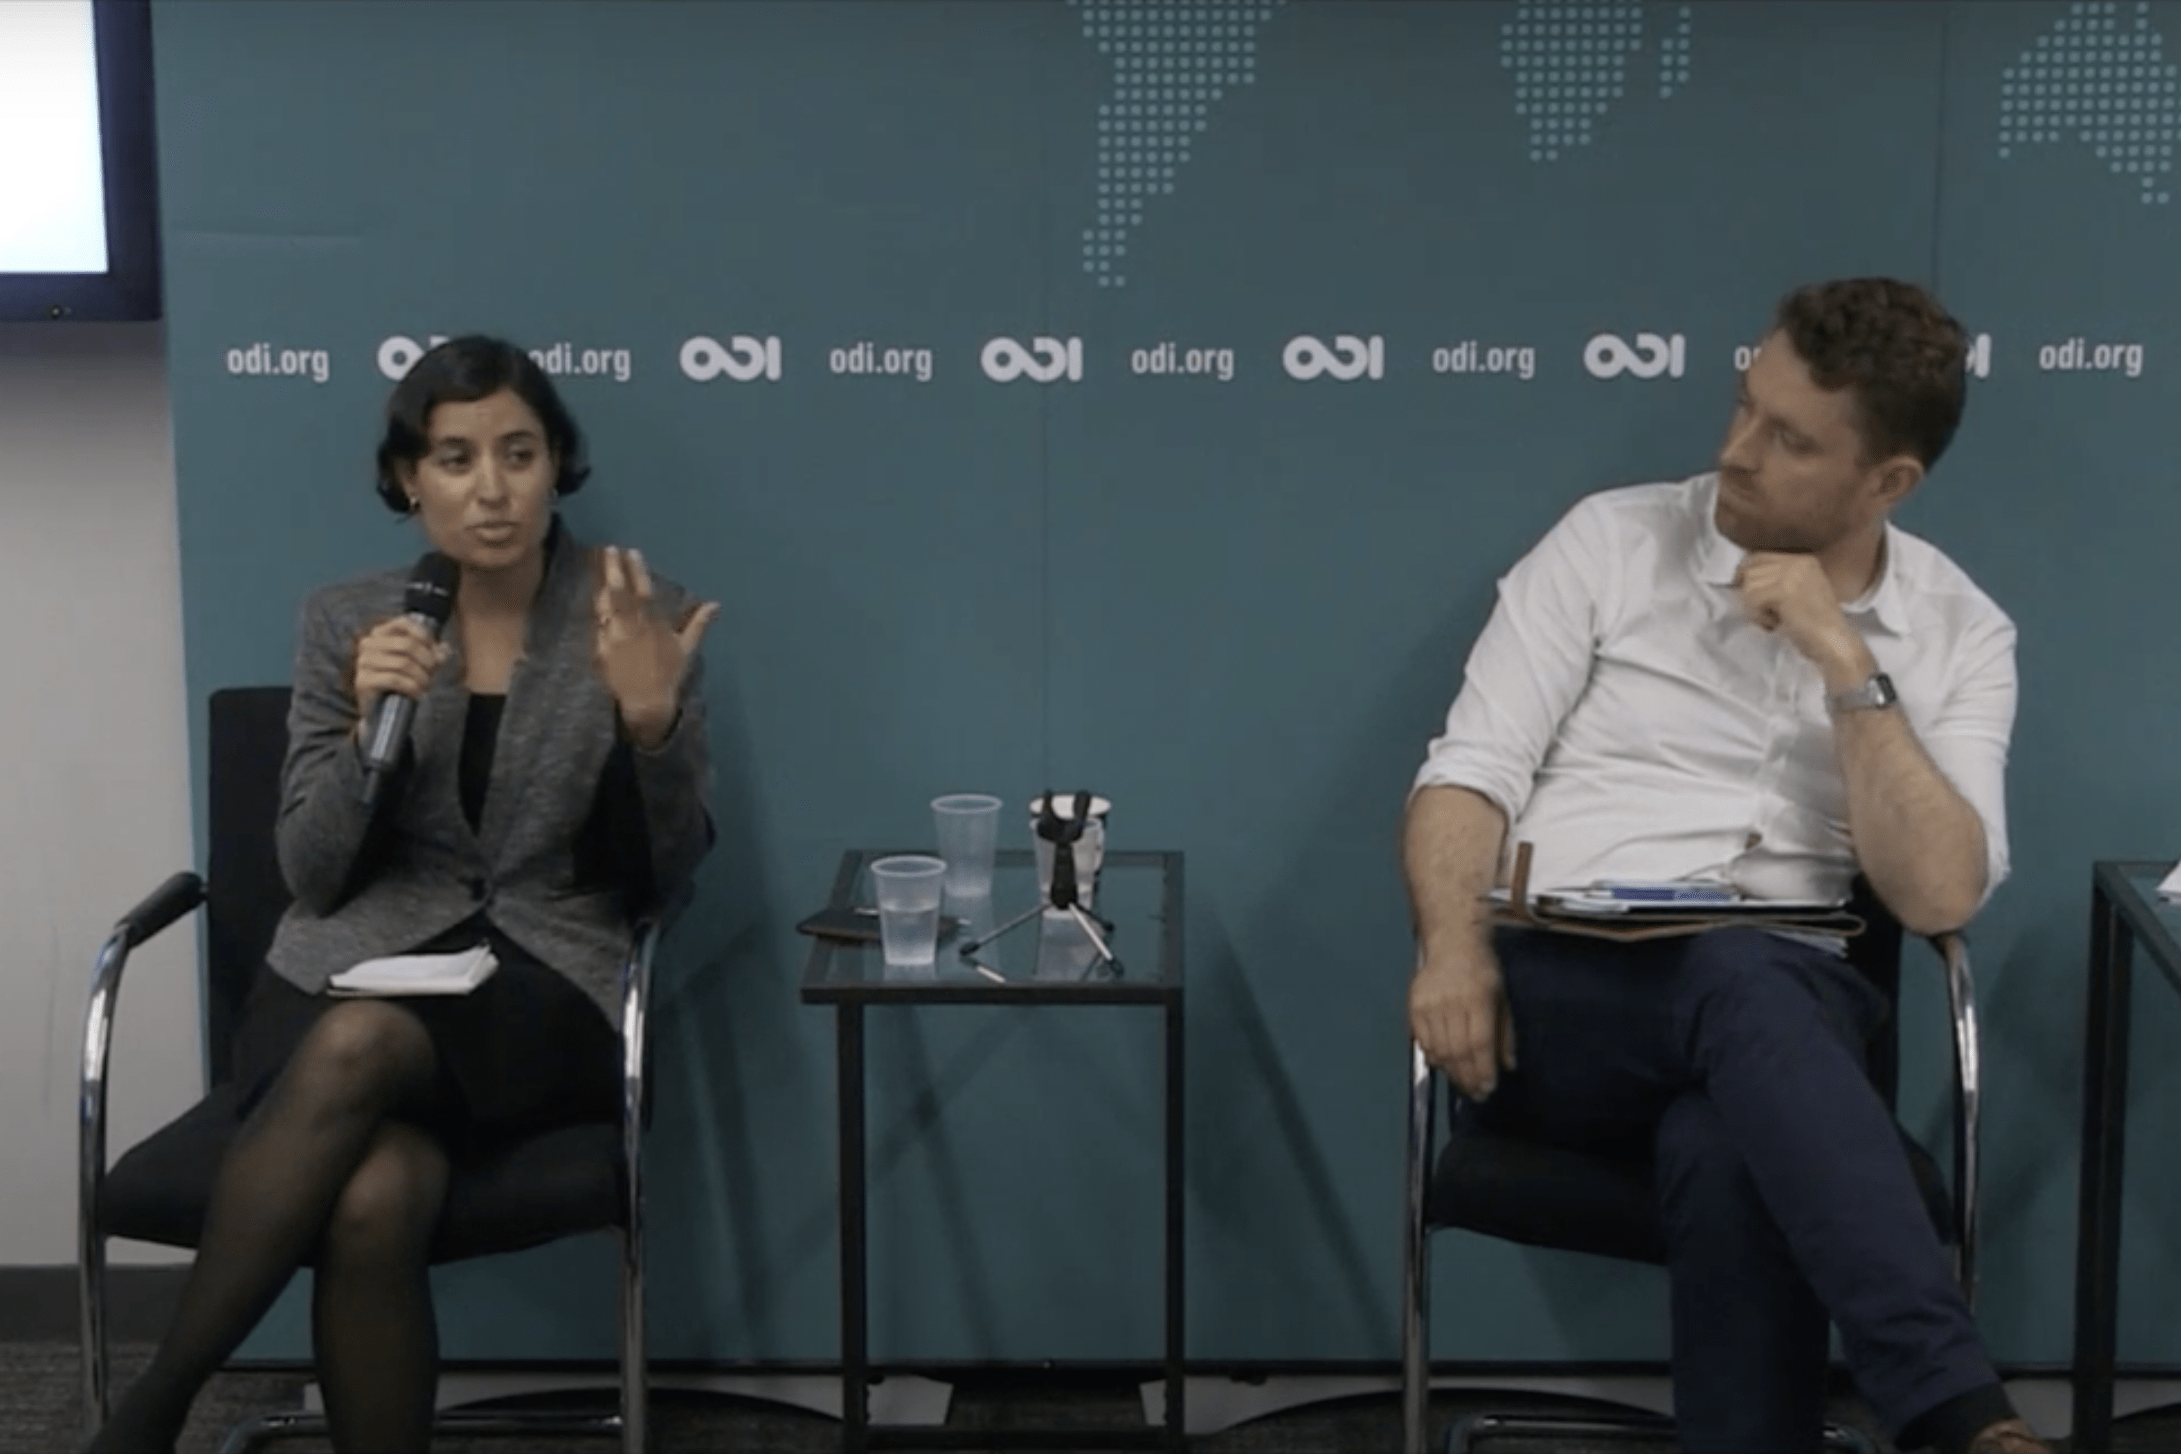 Salimah Samji and Peter Harrington sitting and speaking on a panel with ODI logo behind them